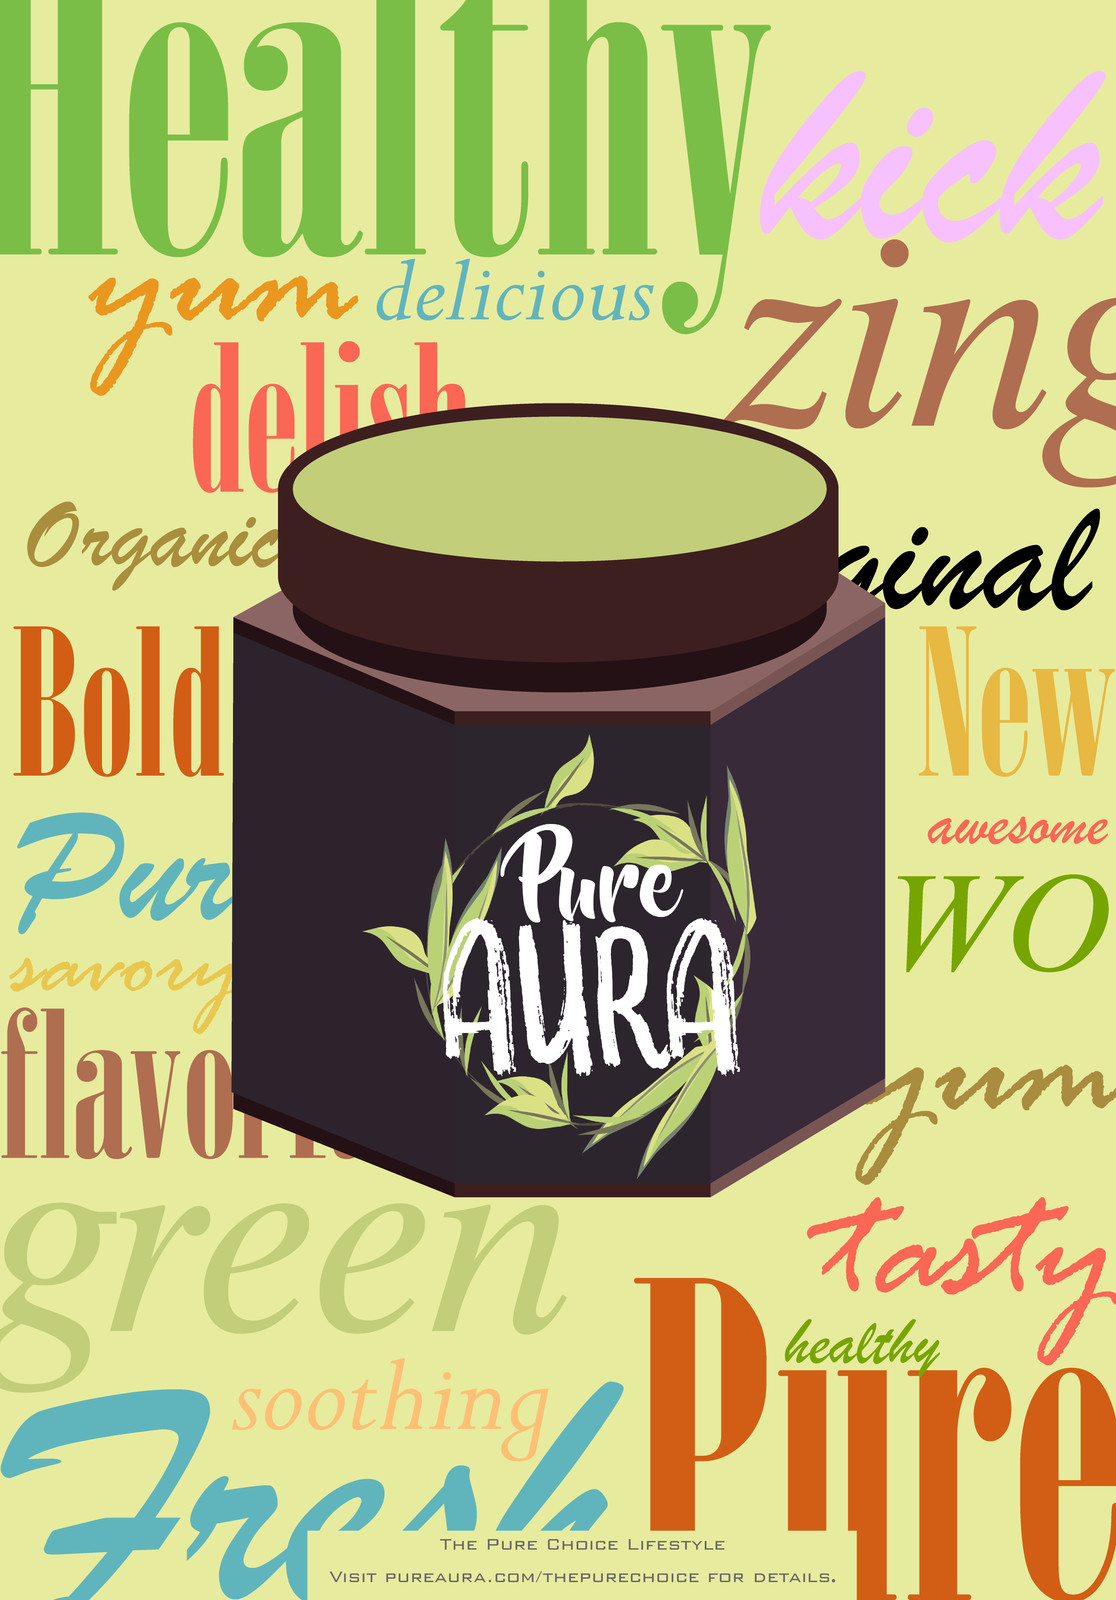 Poster Design
Second collateral piece, this time utilizing the contrasting fonts used in the company’s logo as inspiration. Adjectives describing the feeling and flavors of the tea surround the package, in fonts that also contrast each other.